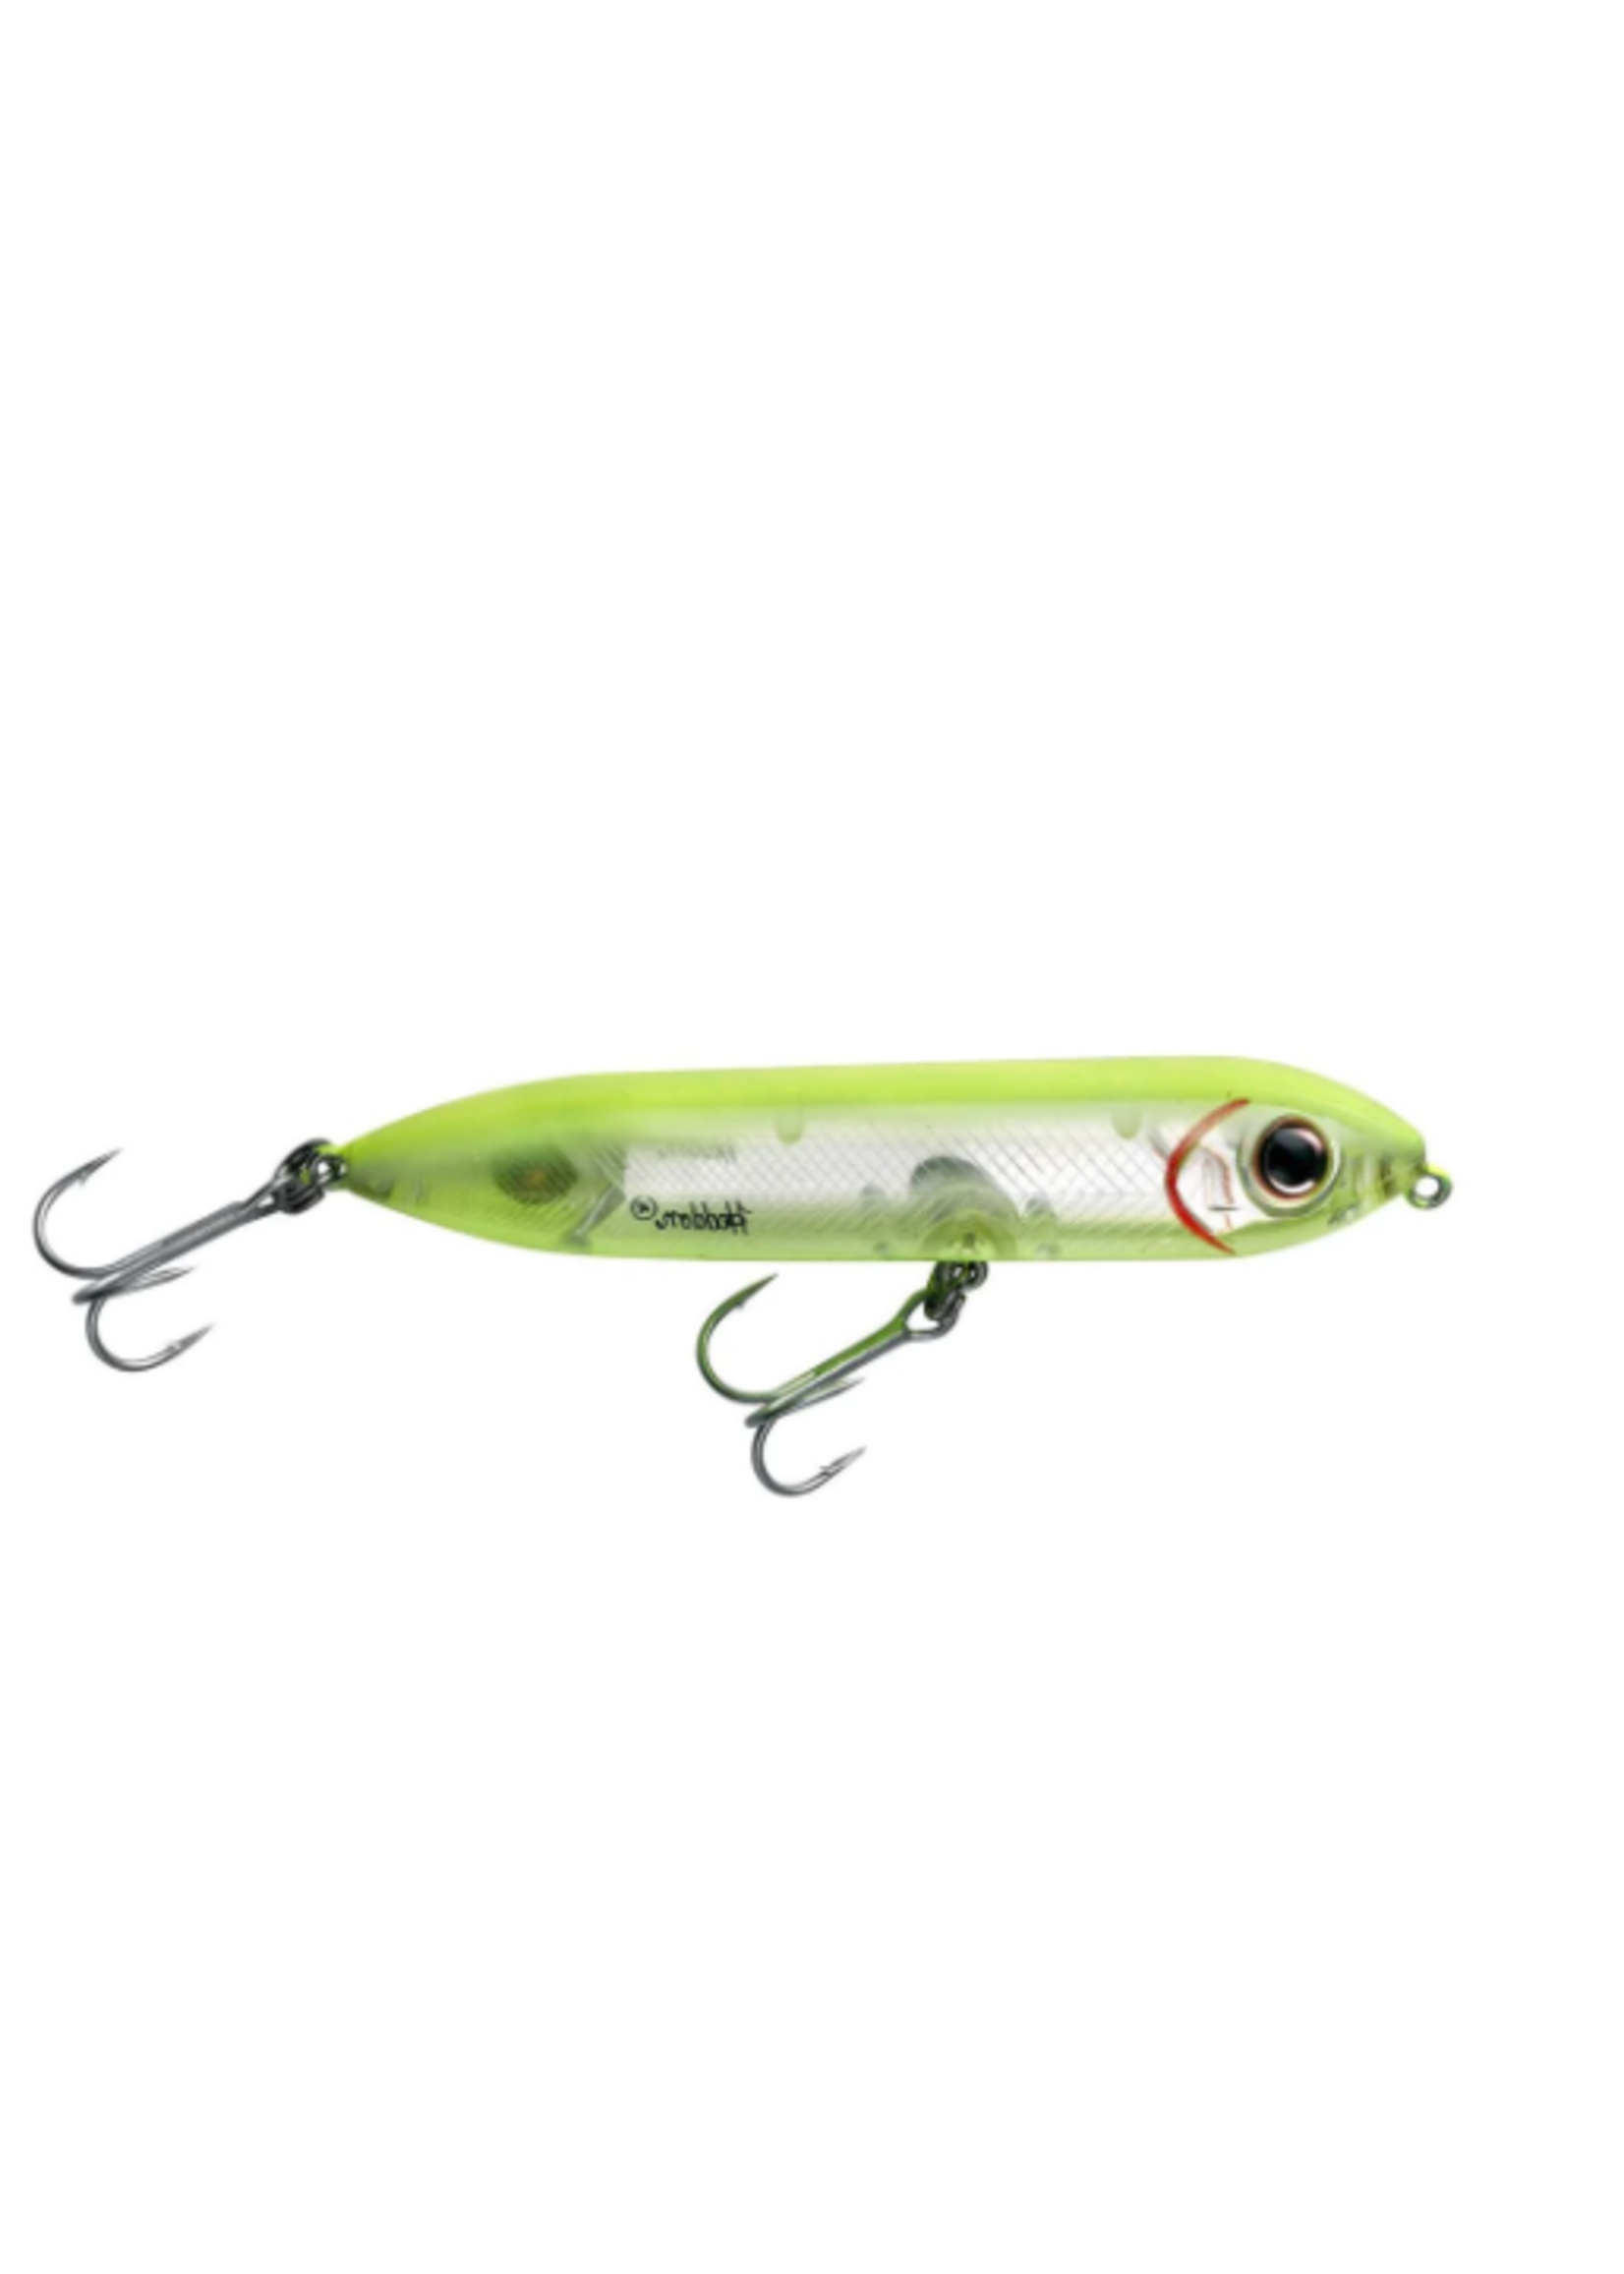 Super Spook Jr 3.5 - Chartreuse Silver Insert - Brothers Outdoors LLC